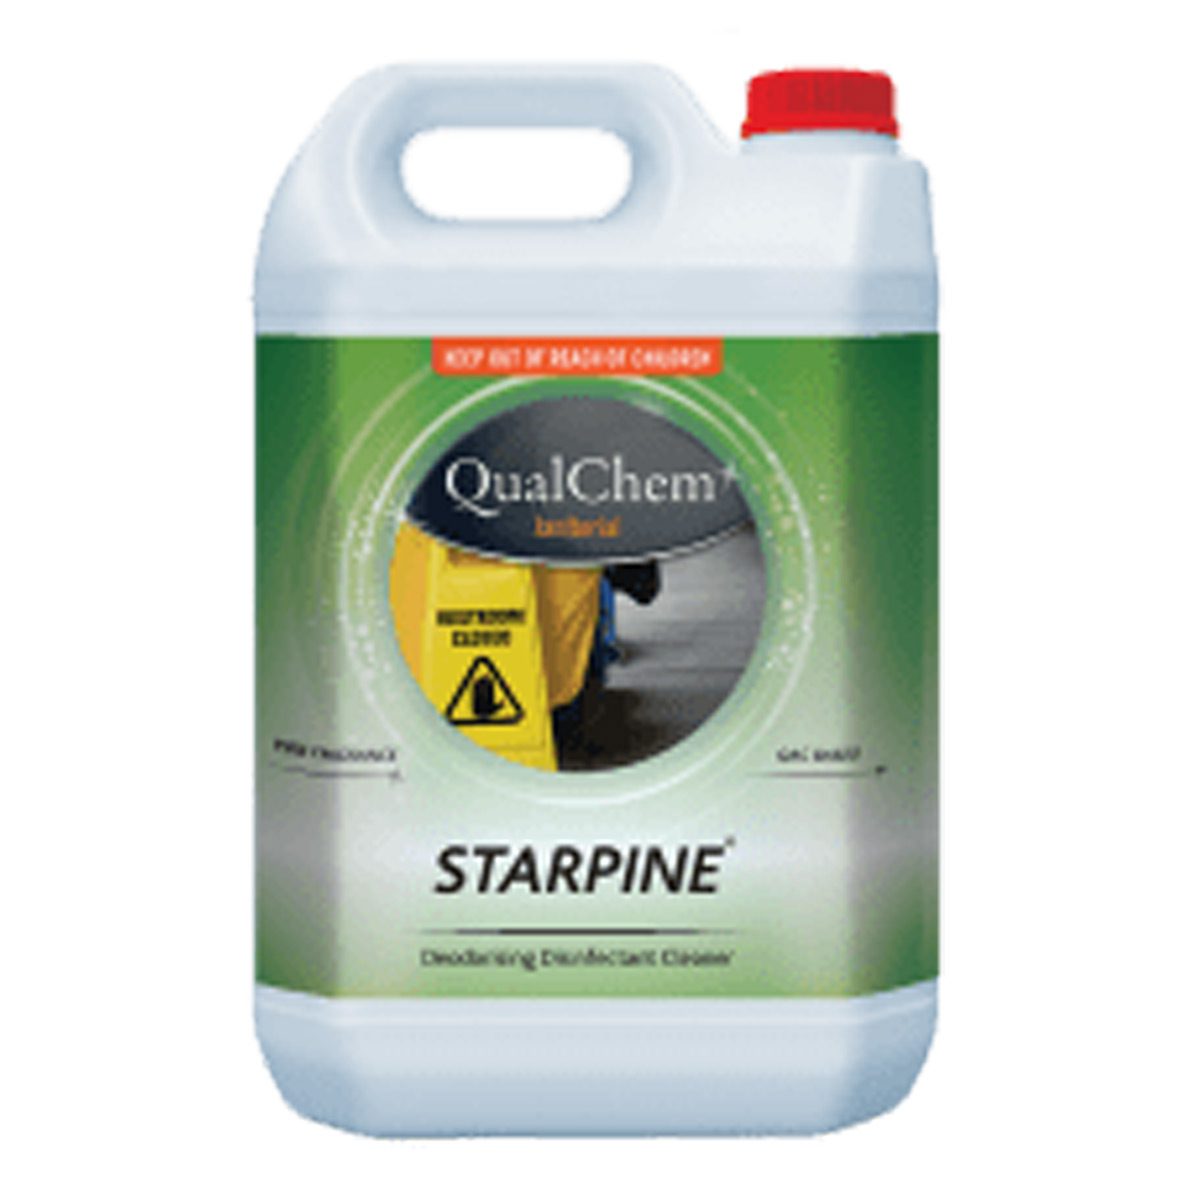 cleaning-products-disinfectants-and-sanitisers-qualchem-star-pine-starpine-disinfectant-5L-litre-clear-green-perfumed-mildly-alkaline-germicidal-liquid-disinfectant-detergent-vjs-distributors-STP5